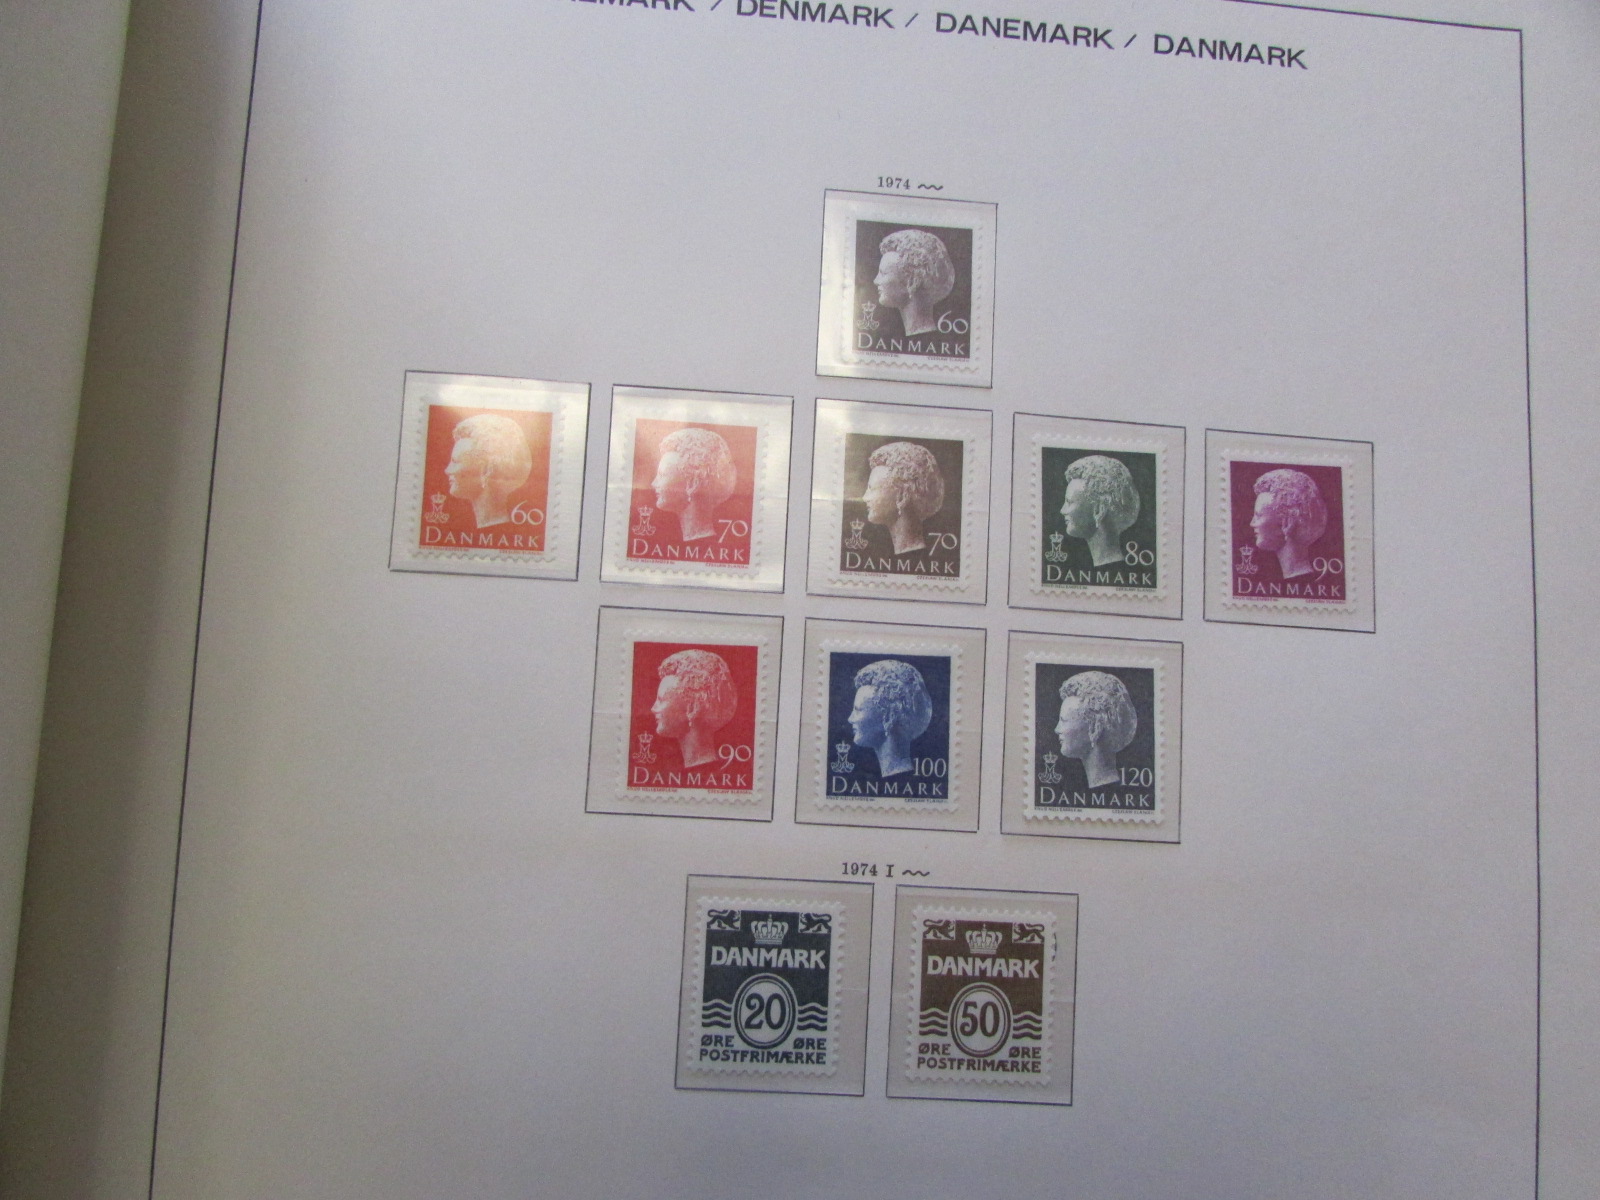 Denmark, printed older Shaubek album with a quite comprehensive collection from earlies - inc Sk